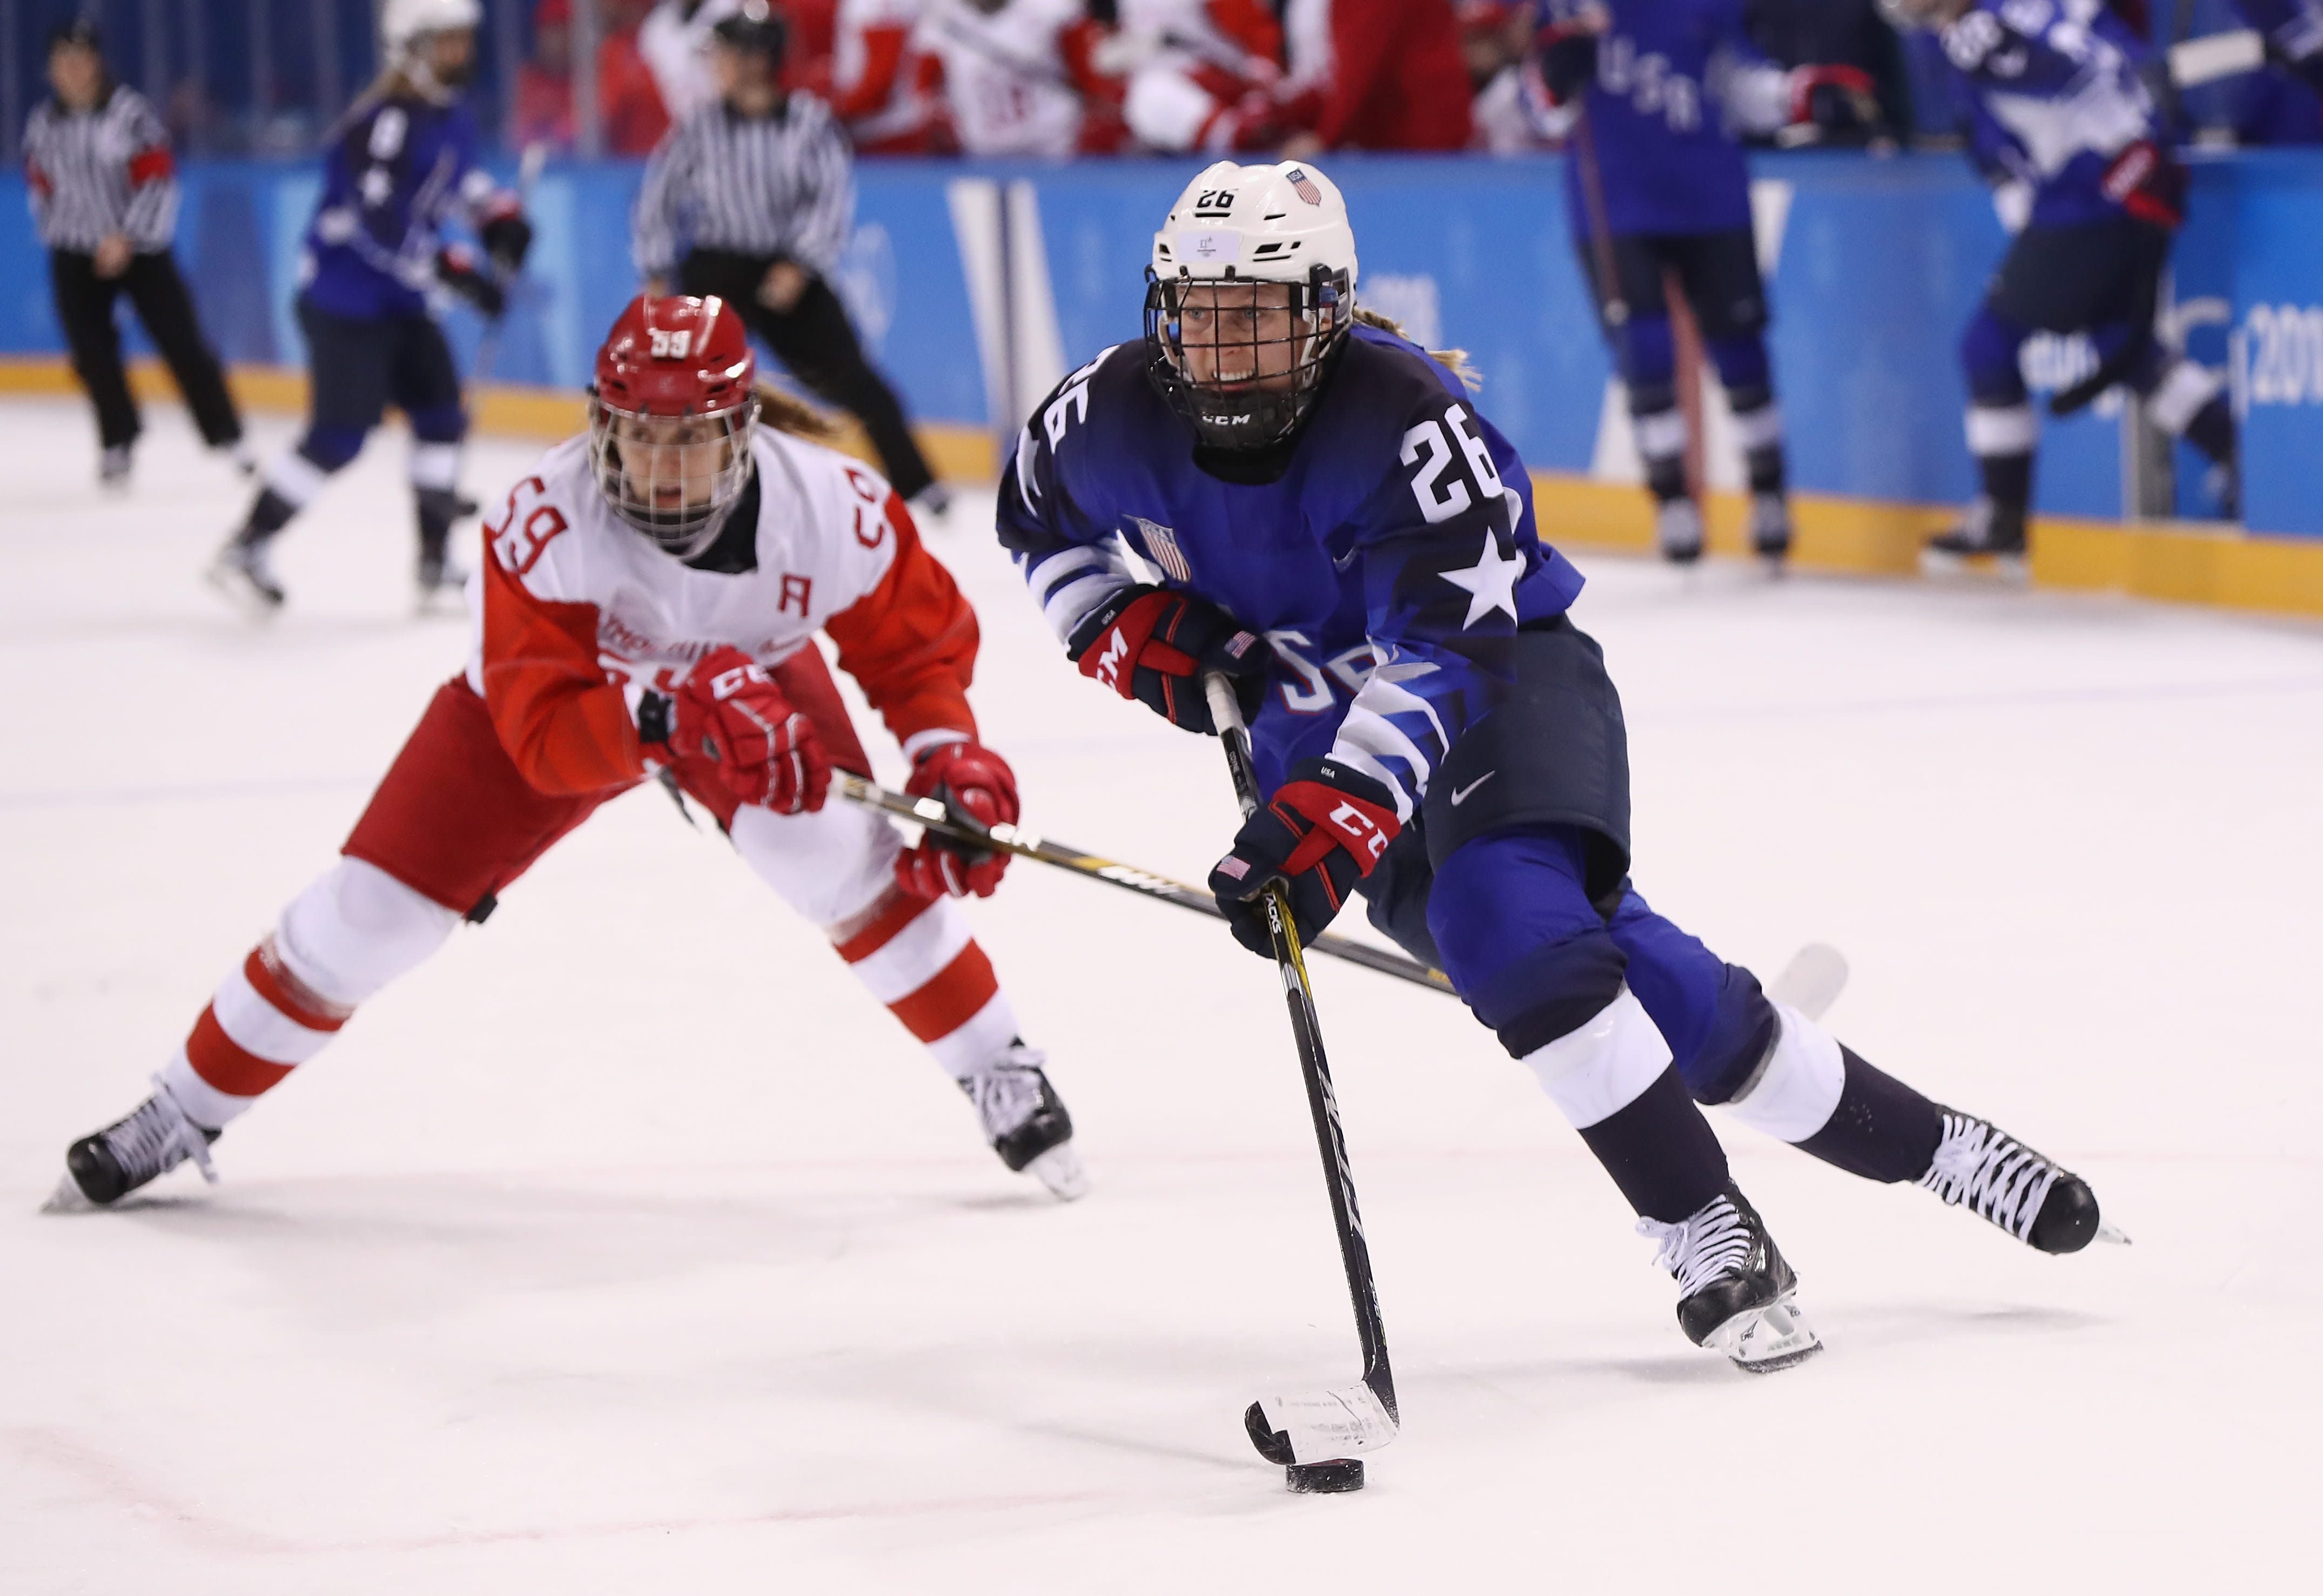 Kendall Coyne Schofield - Contributions